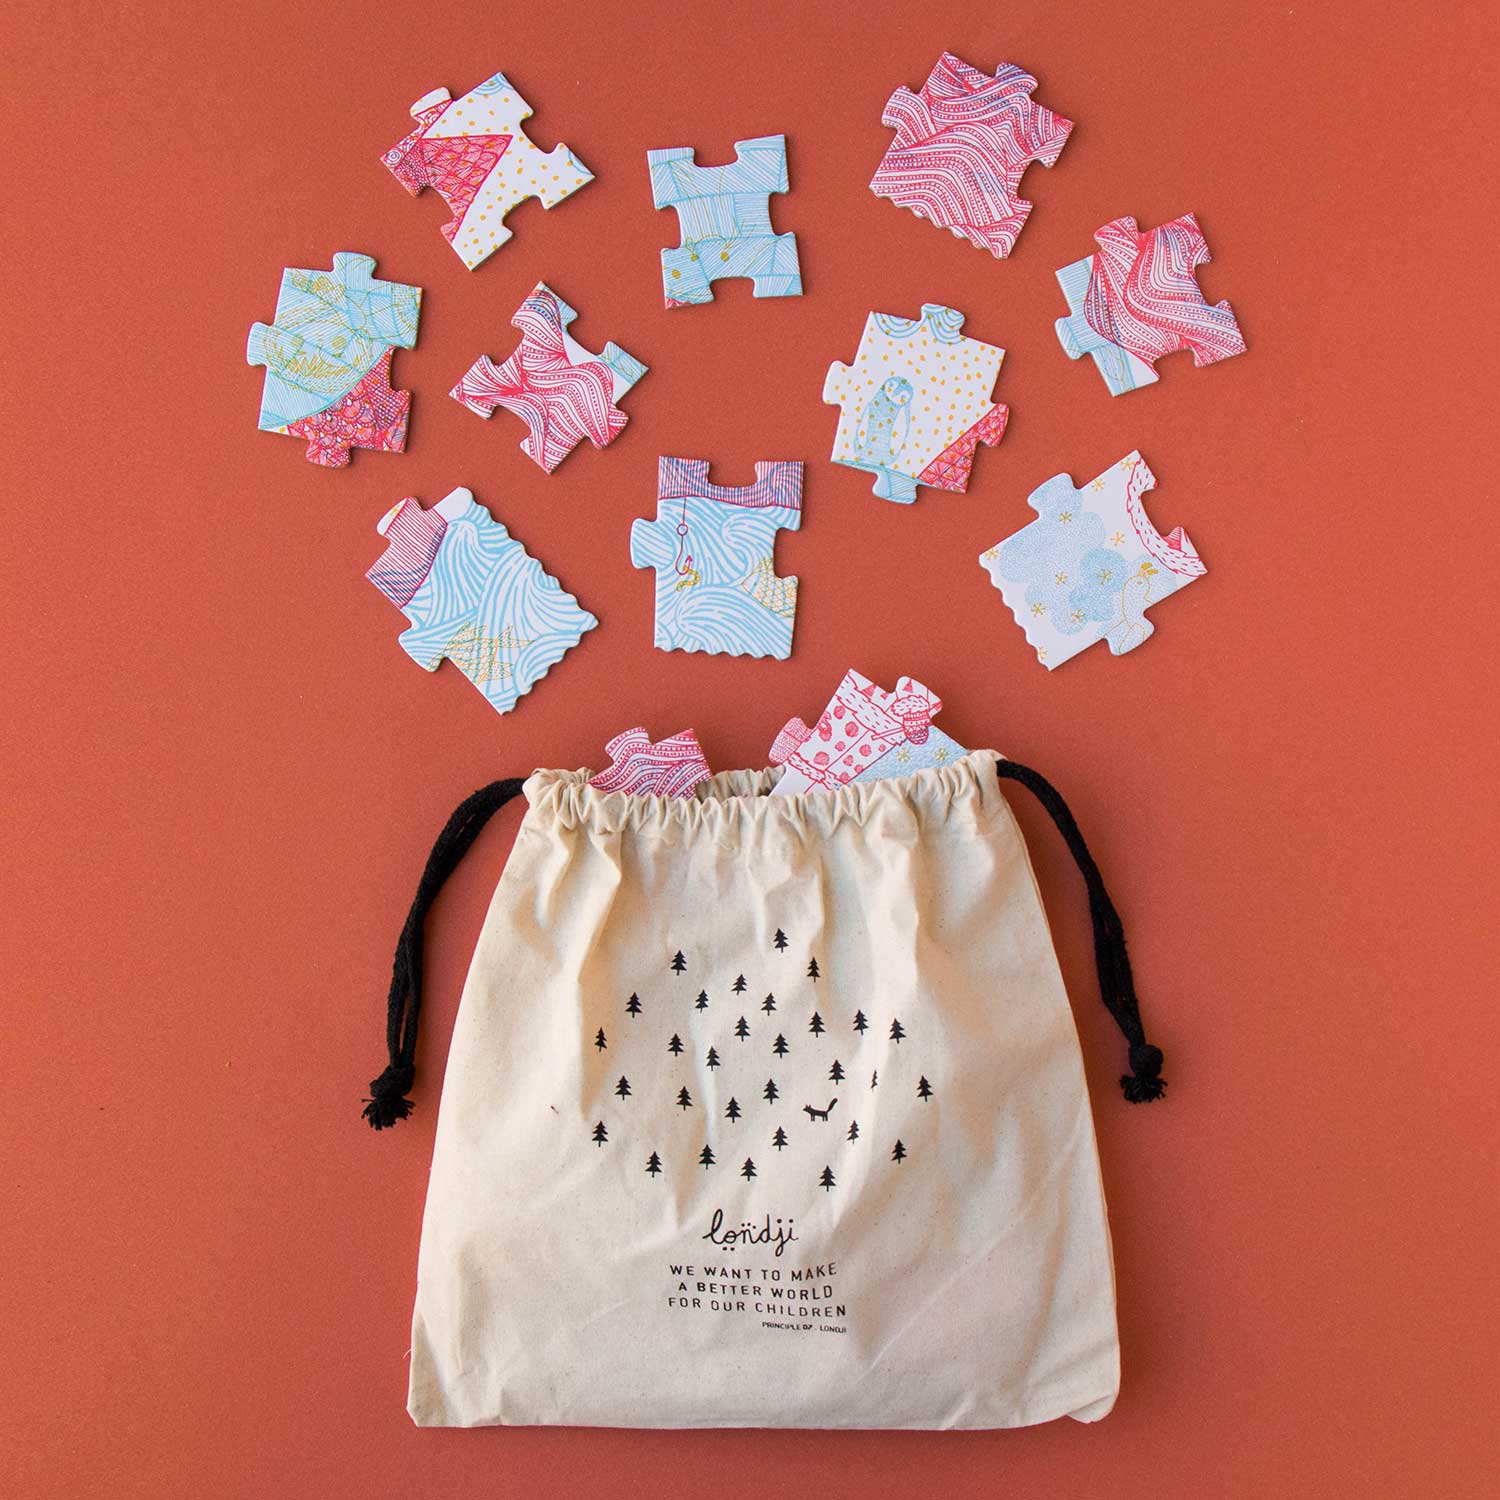 Image shows scattered puzzle pieces and a canvas draw strong bag against a red backdrop.